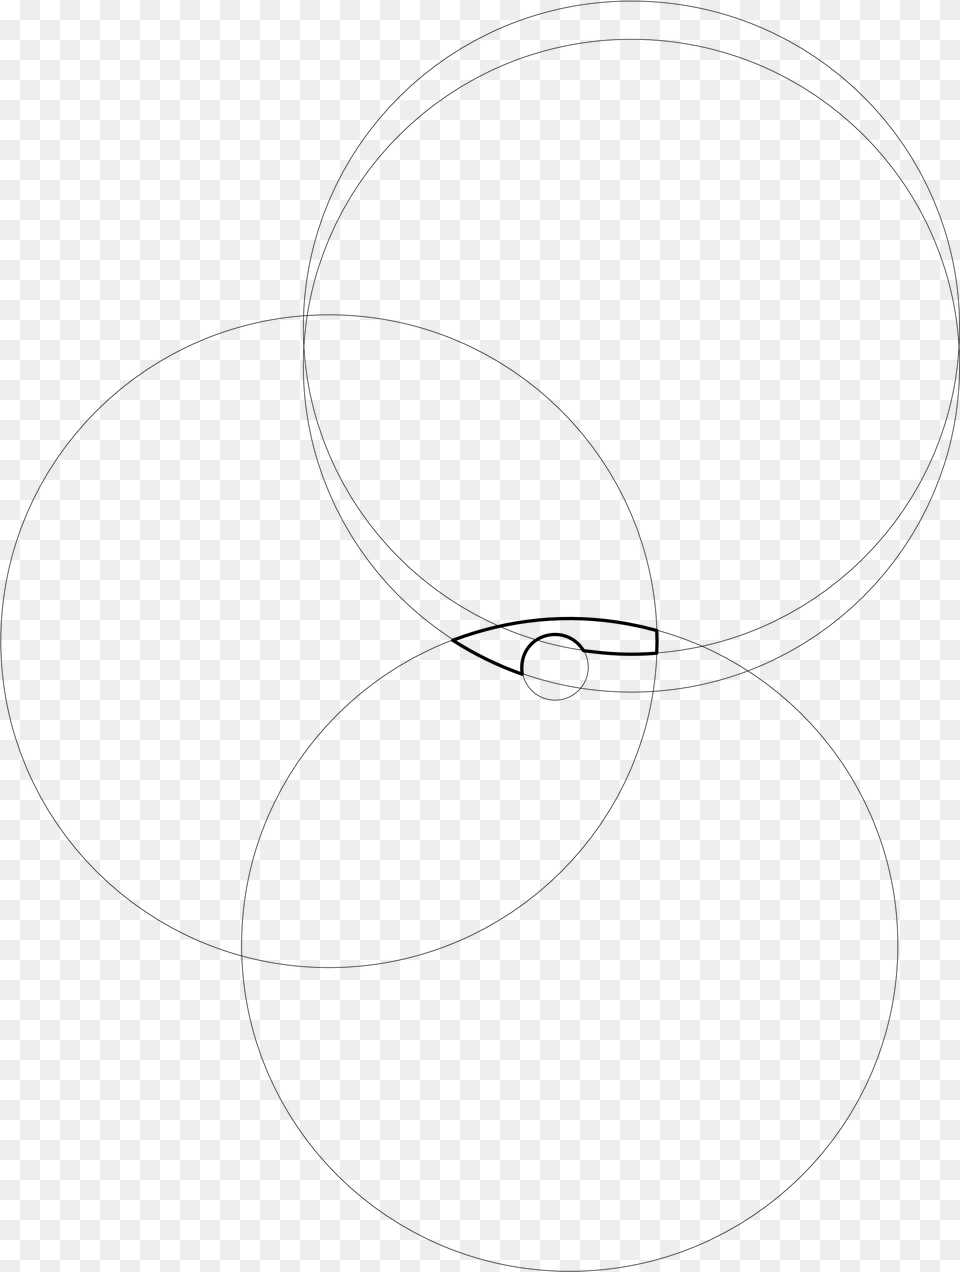 Circles Turning Into A Butterknife Circle, Gray Free Png